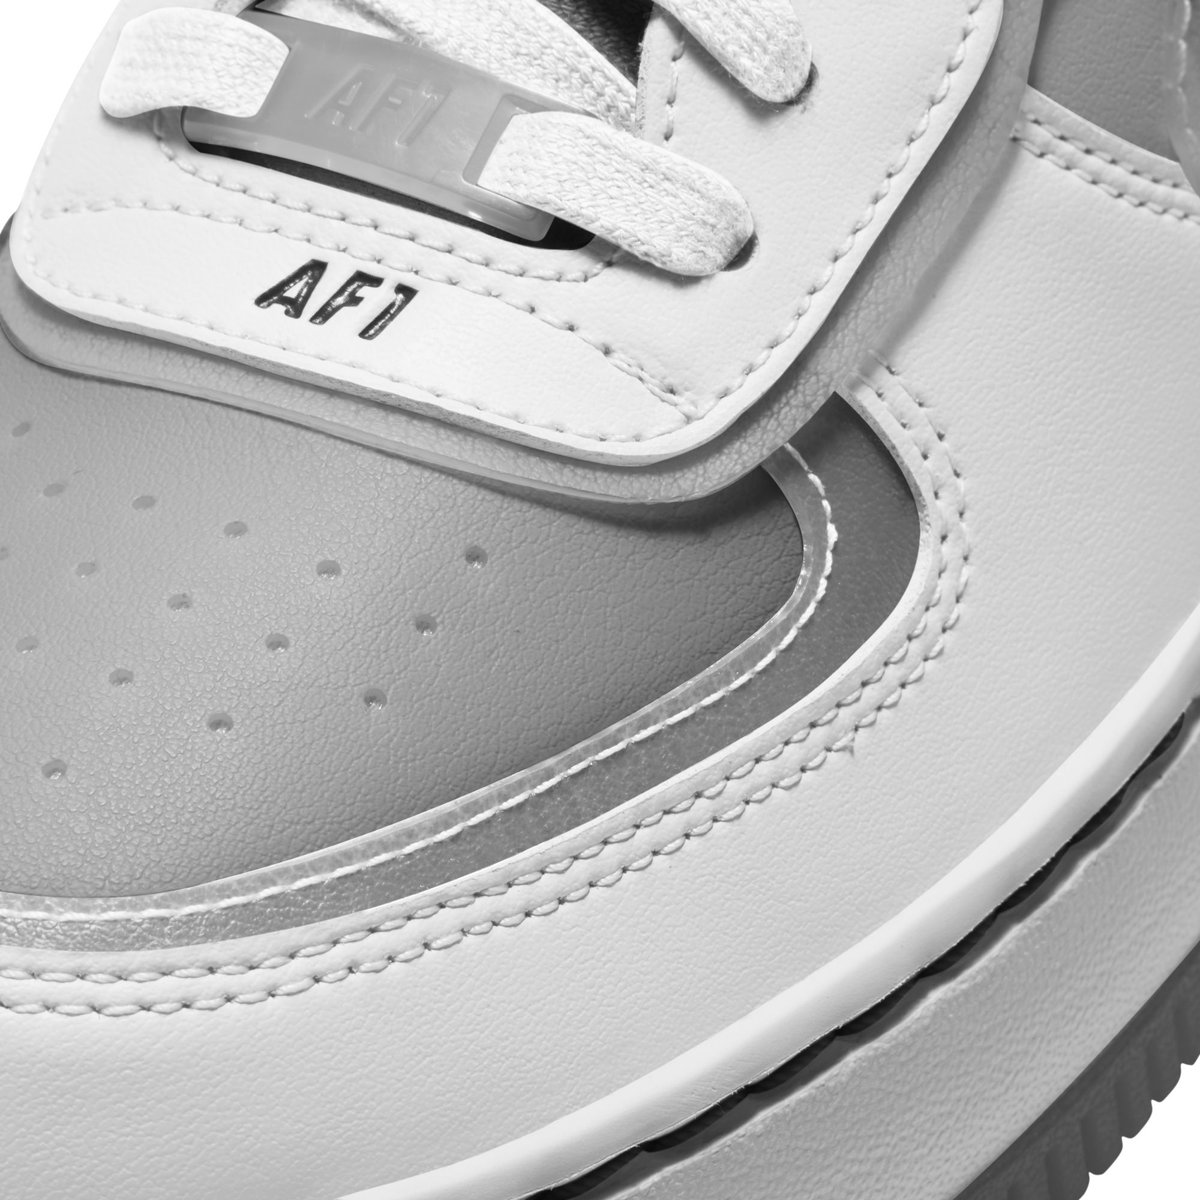 air force shadow particle grey